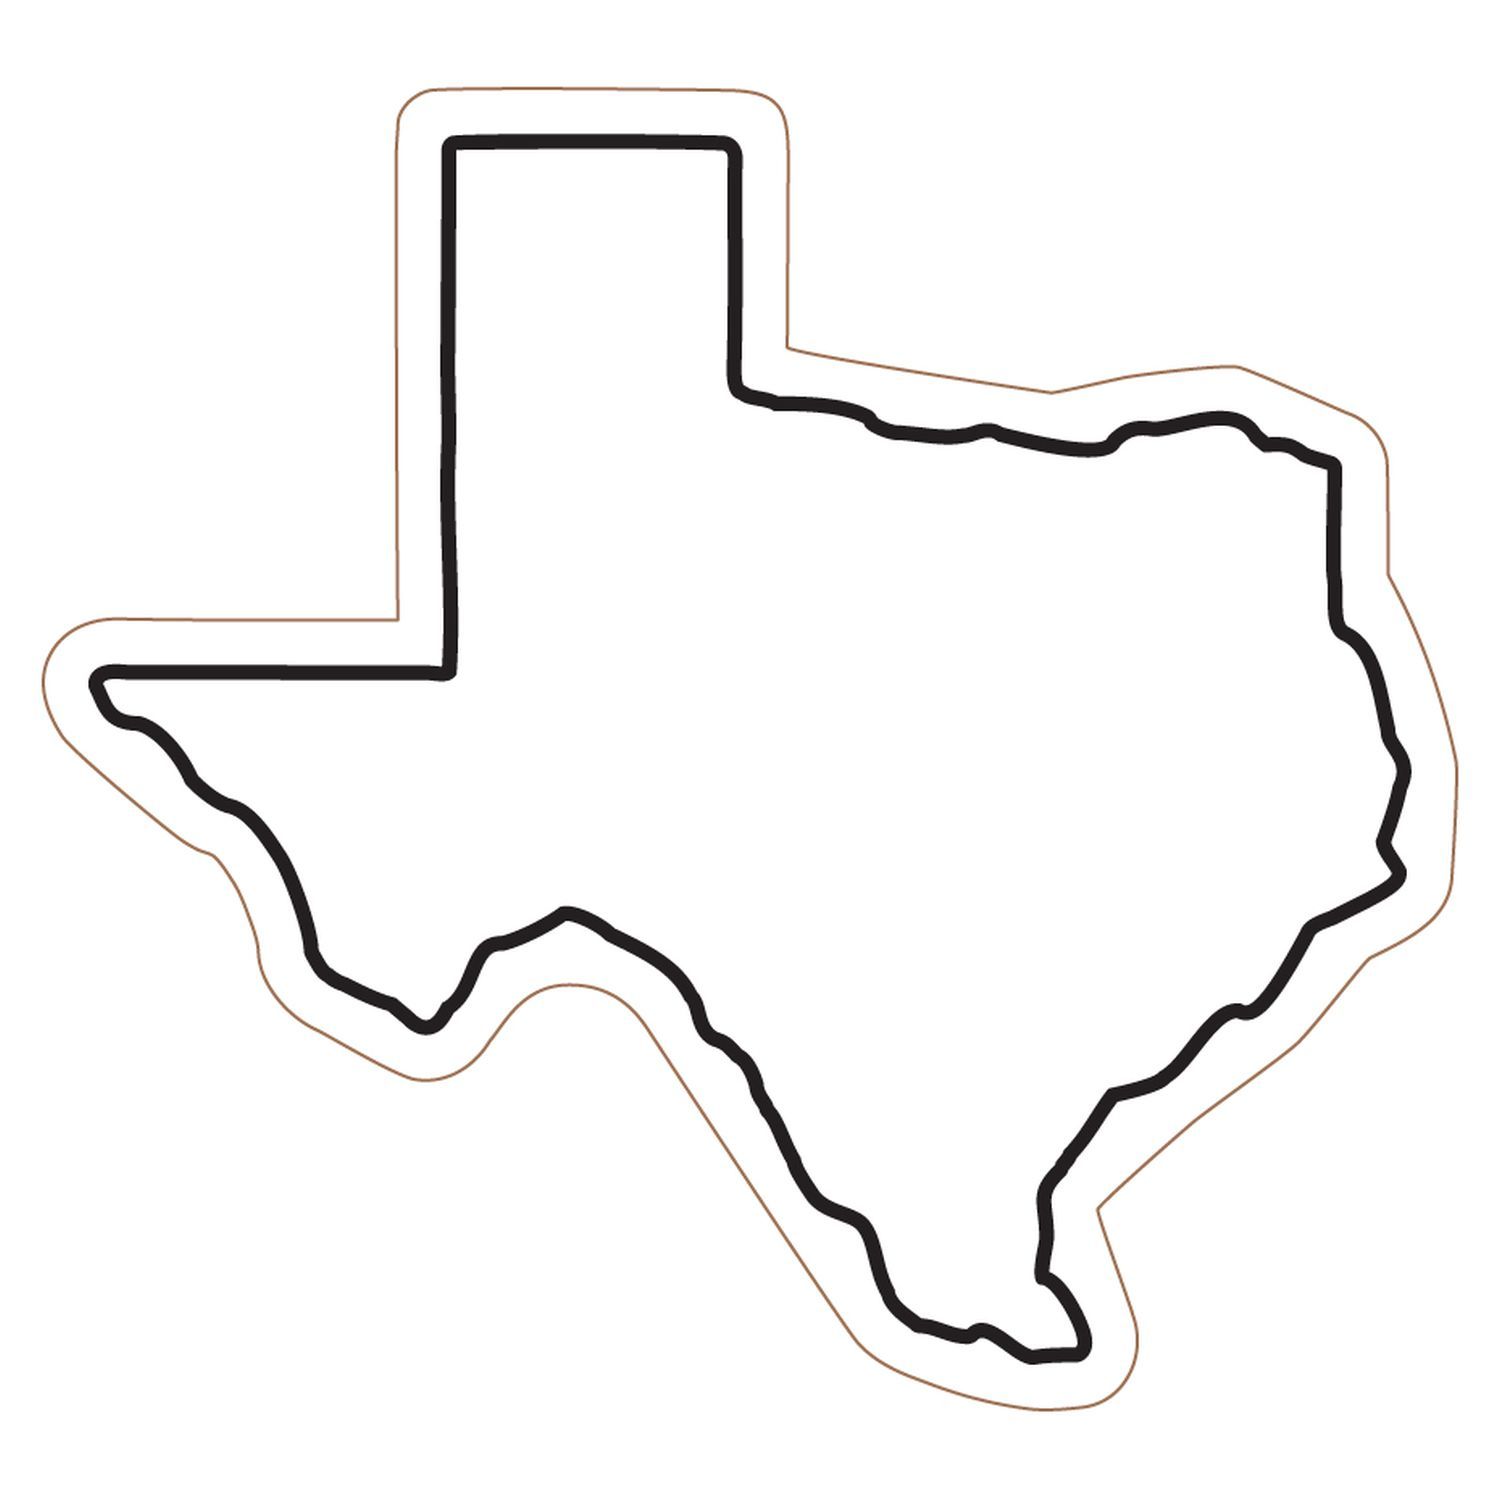 State of texas outline clip art clipartfest